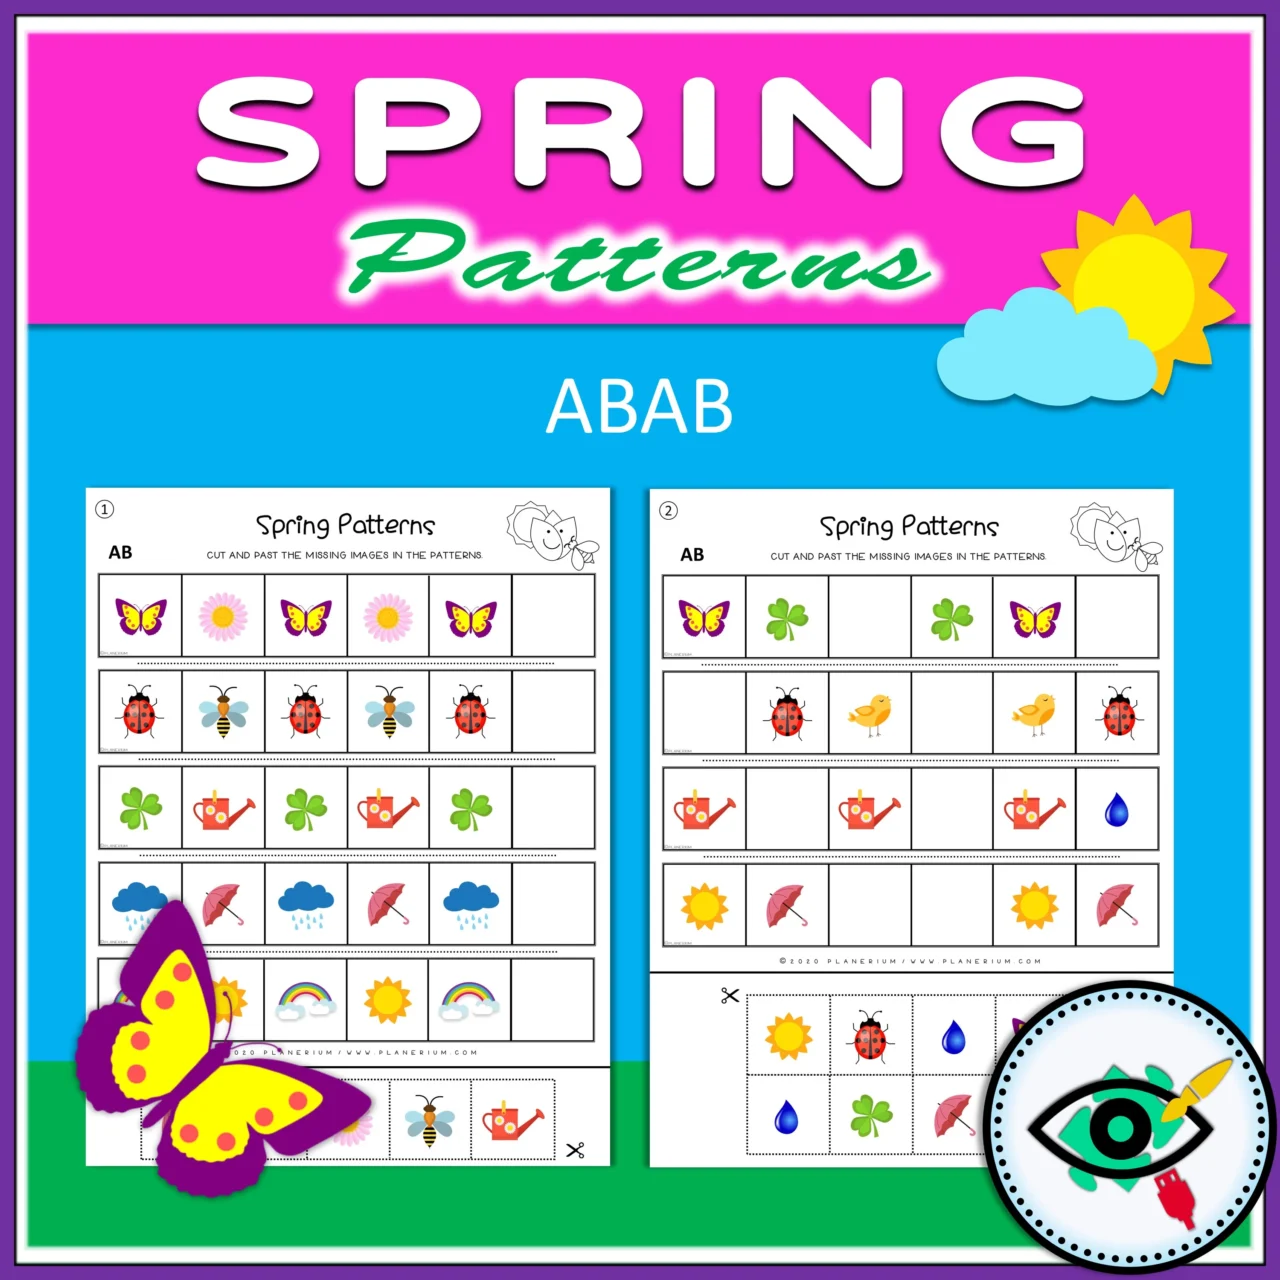 Spring - Patterns Activity - Image Title 2